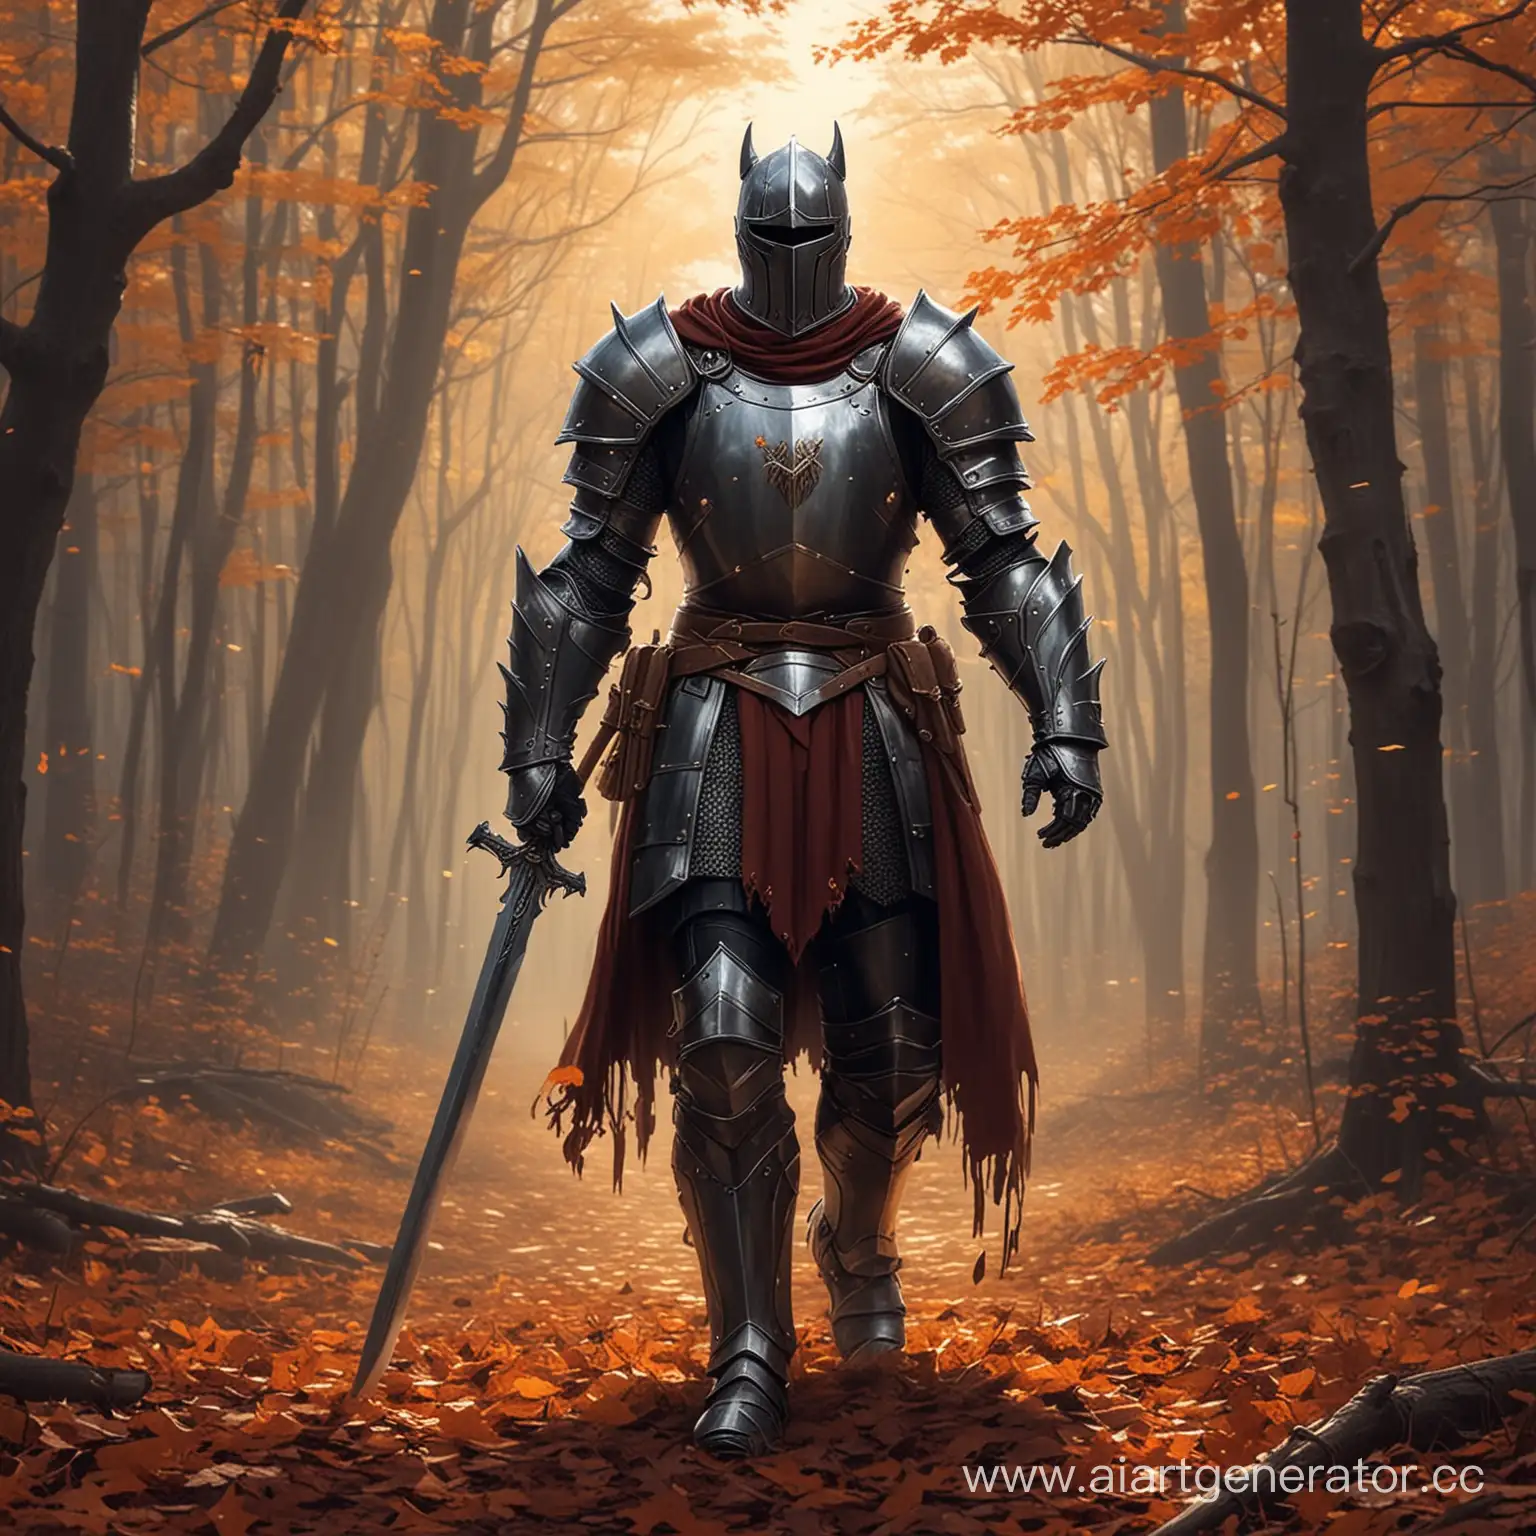 Brave-Knight-Descending-in-Autumnal-Glory